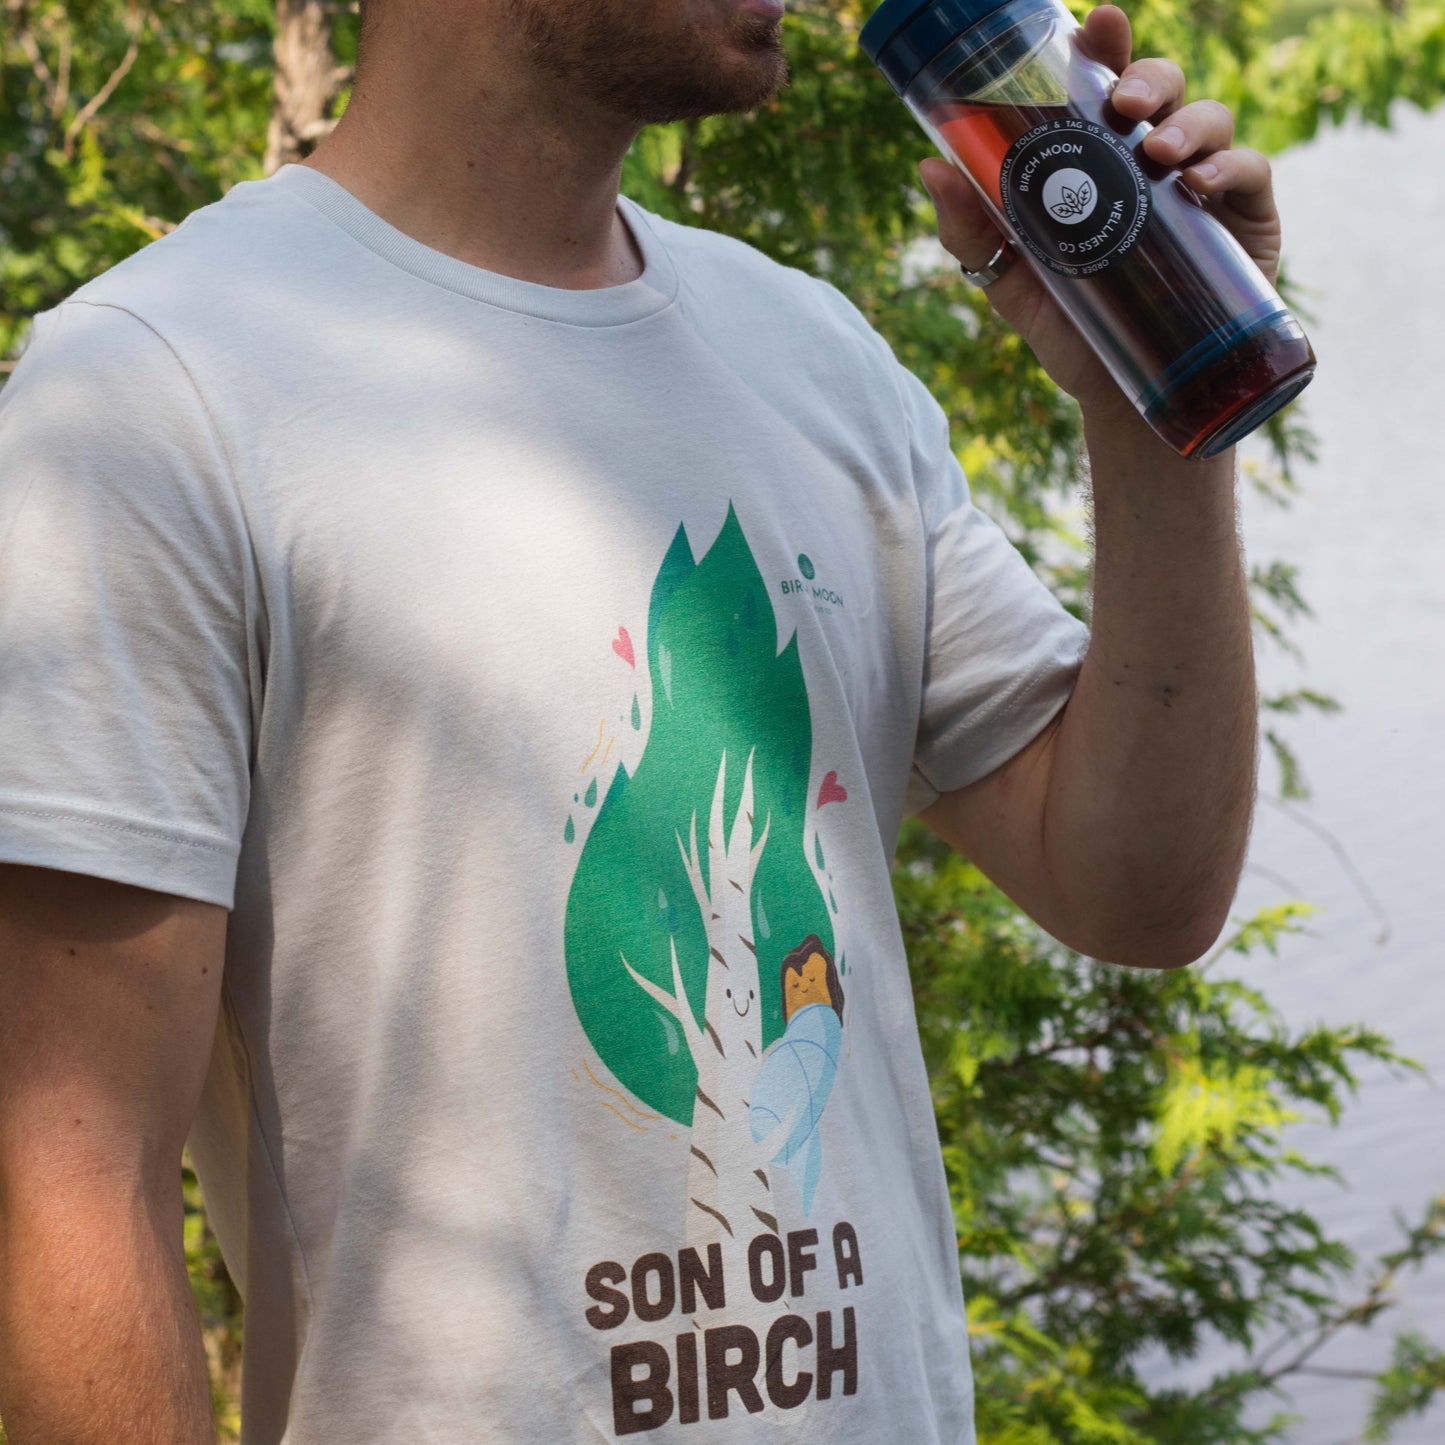 Son of a Birch – Cotton Short Sleeve Graphic T-shirt